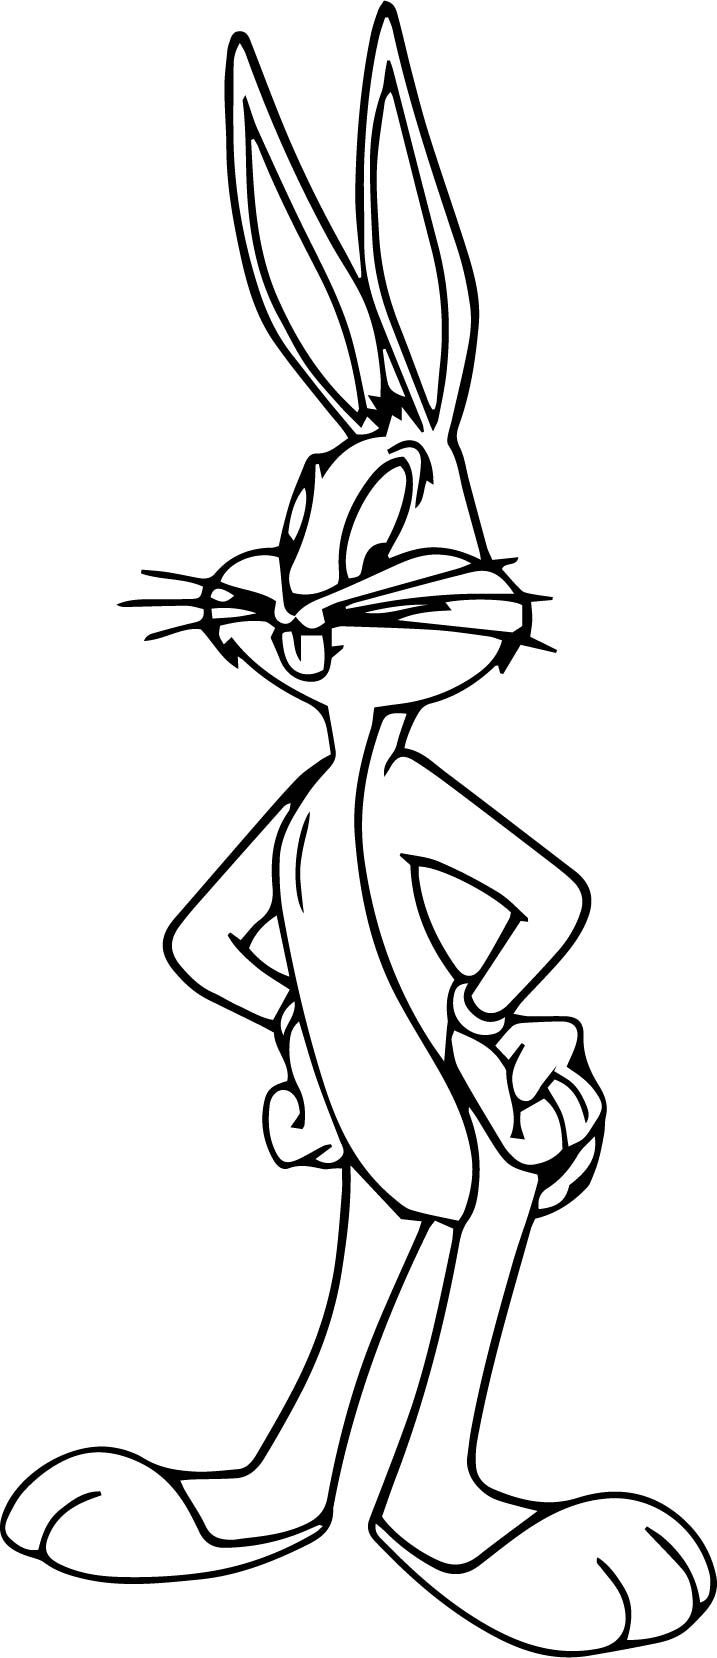 Bugs Bunny Coloring Page | Wecoloringpage | Bunny Coloring Pages - Free Printable Bugs Bunny Coloring Pages